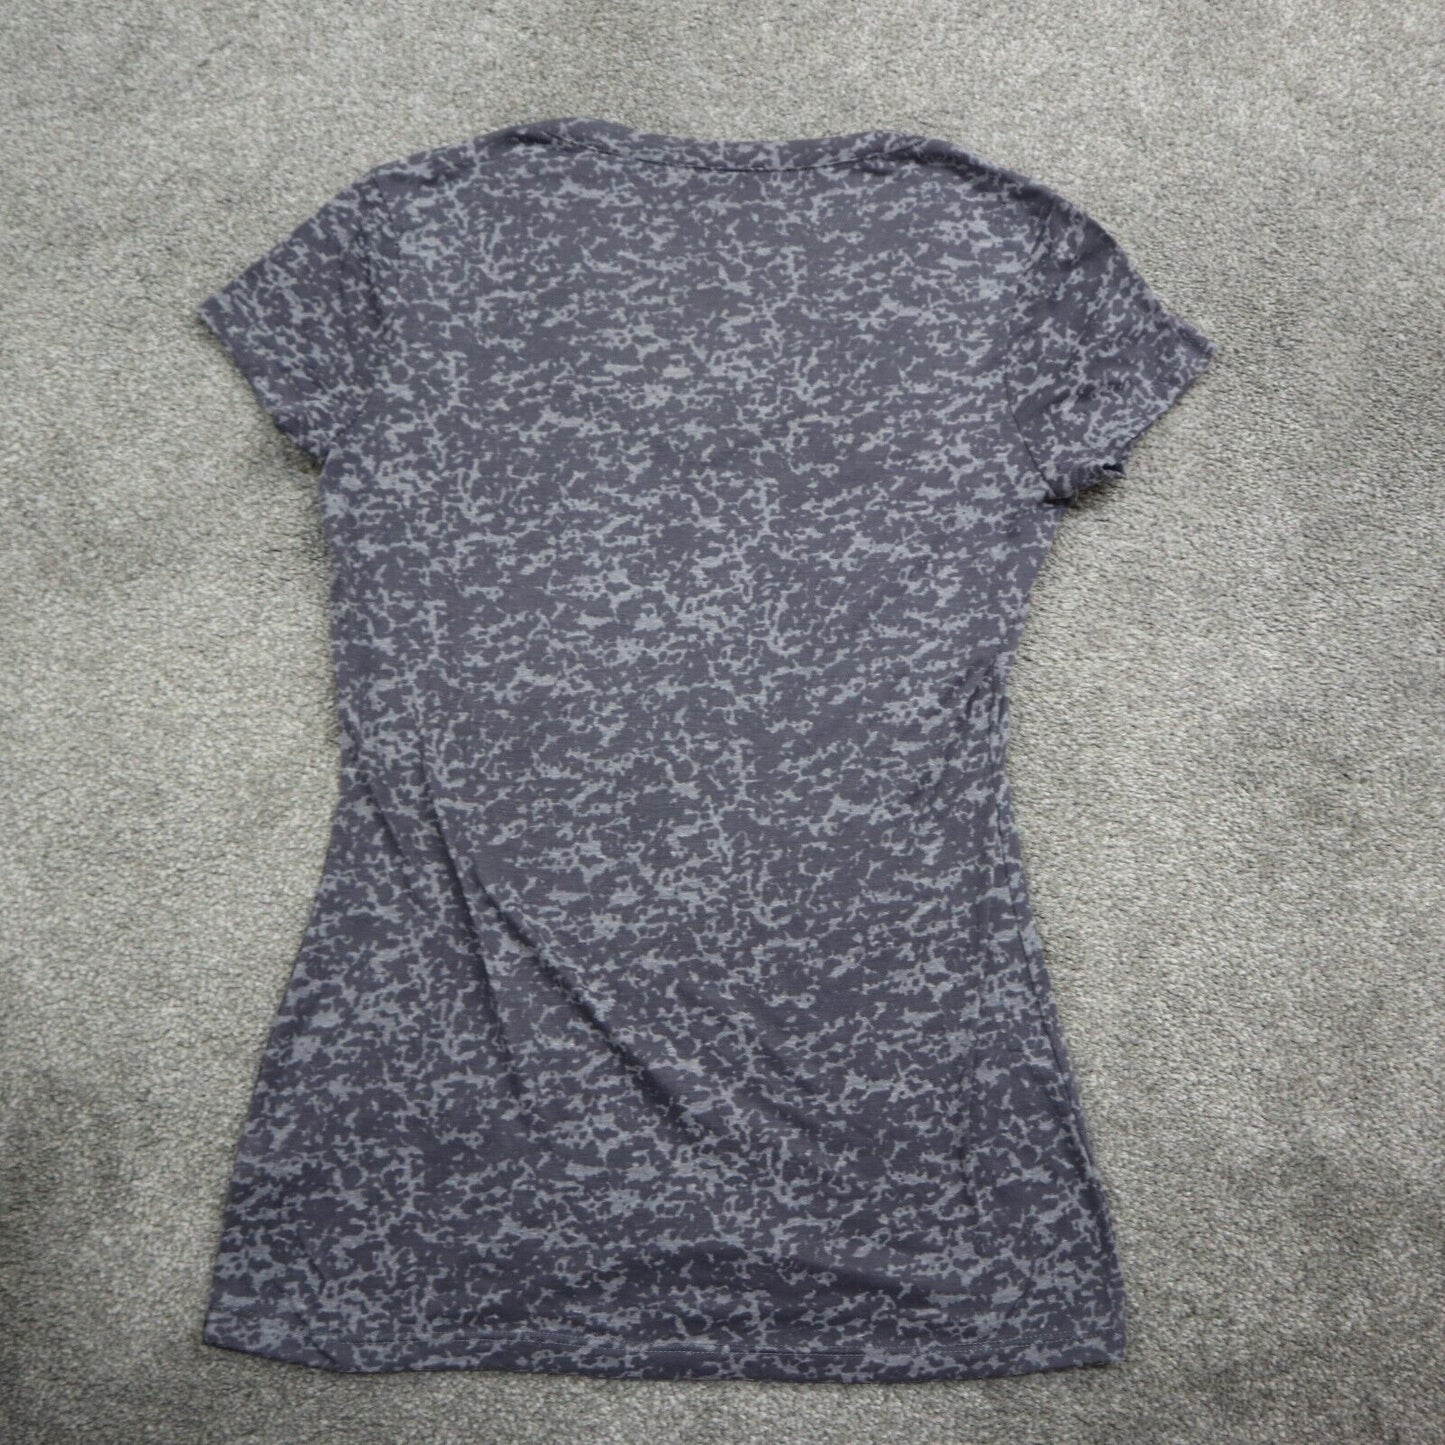 Wrangler Womens V Neck T Shirt Top Fitted Short Sleeve Blue Gray Size Small